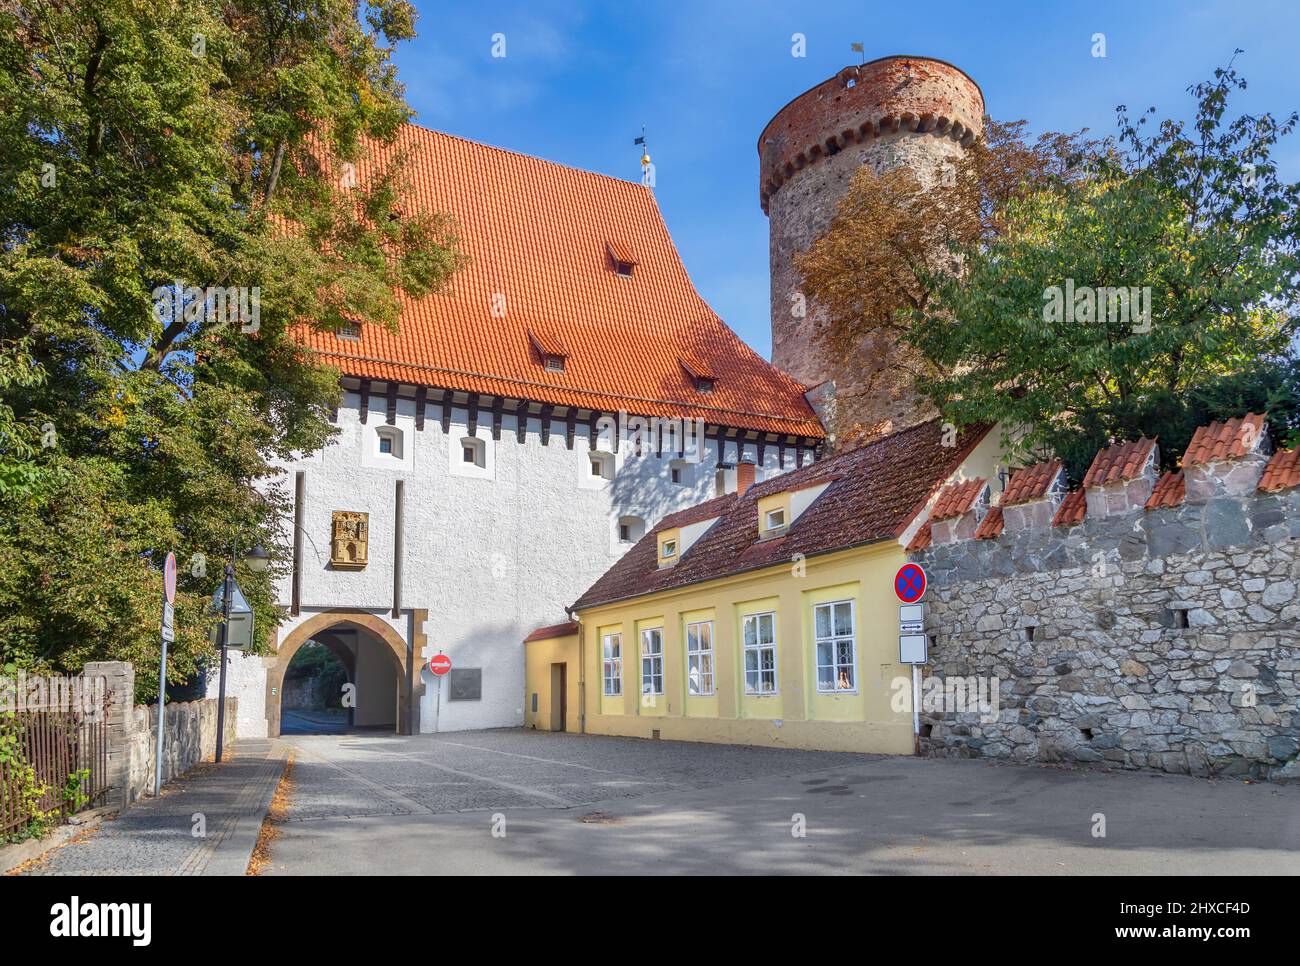 Tabor, Czechia. Historic Kotnov Tower and Bechyne Gate in Old Town Stock Photo